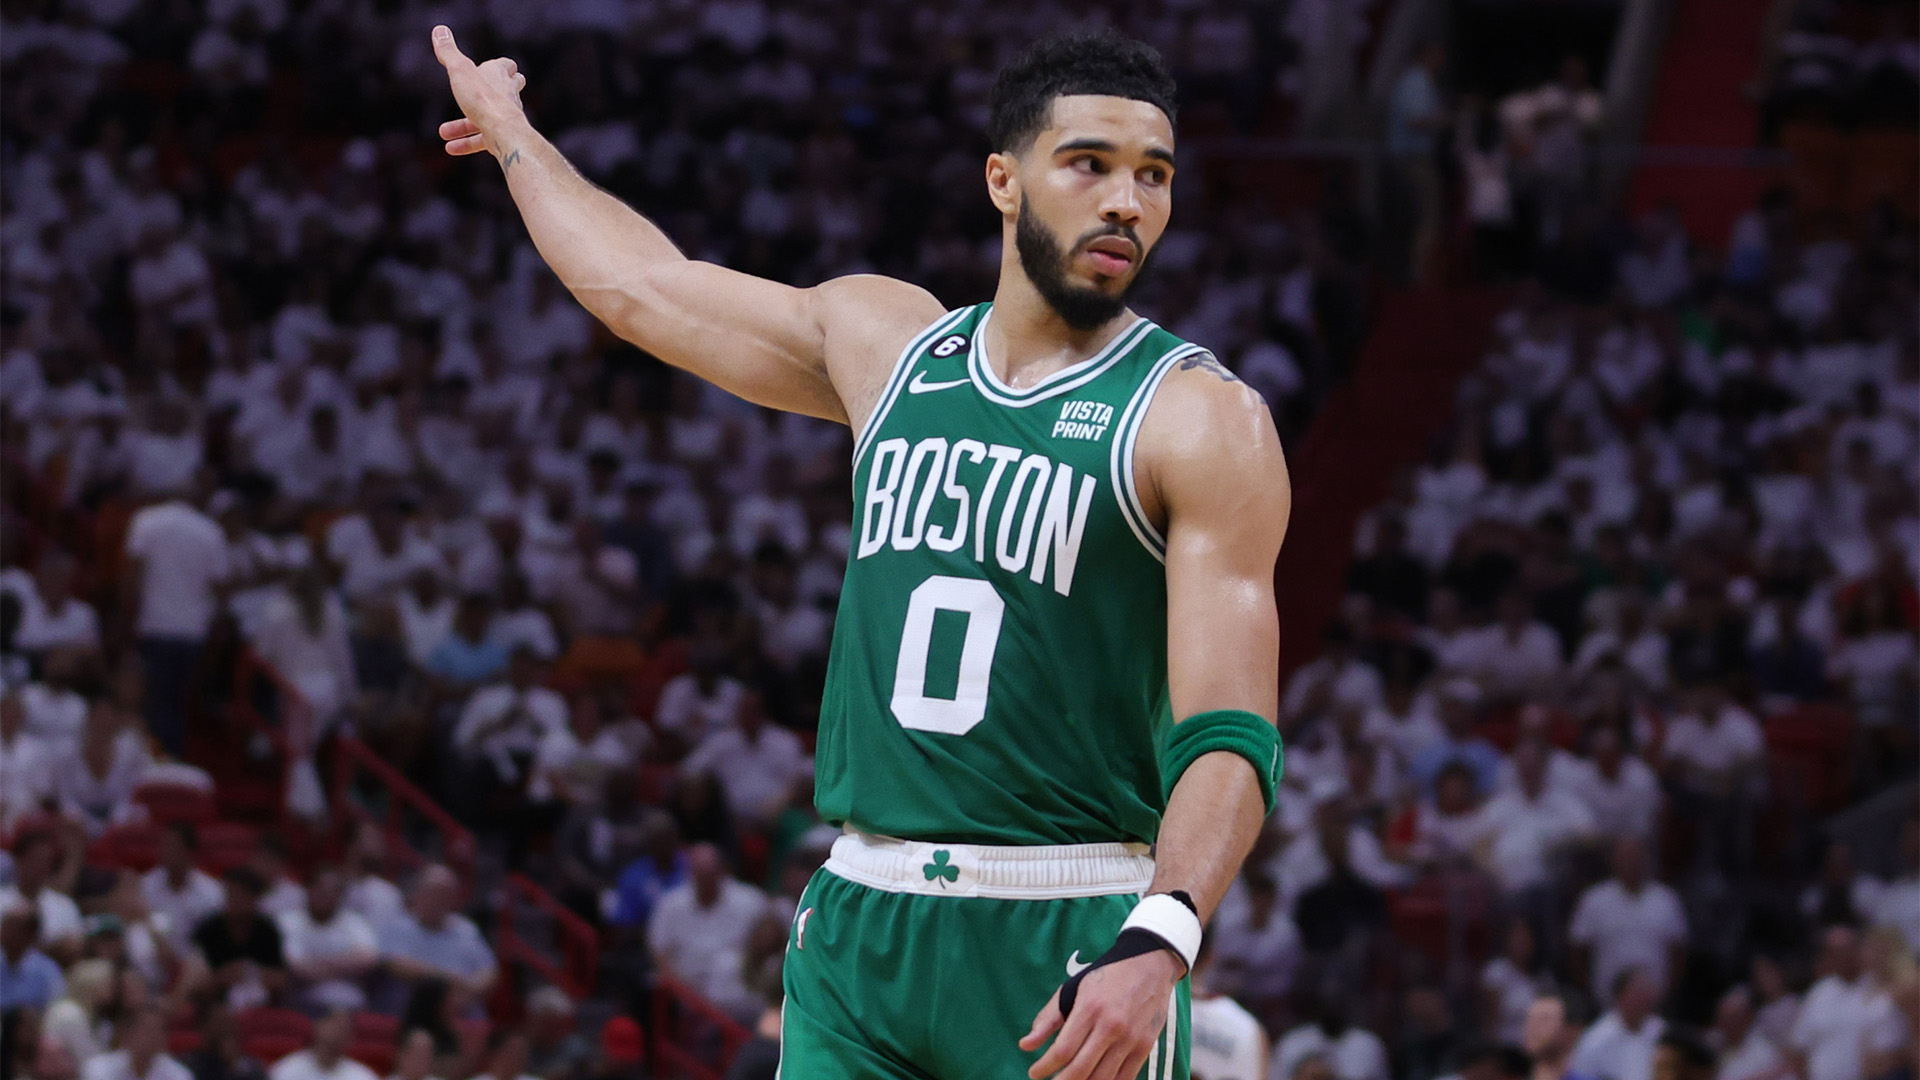 The Boston Celtics live to fight another day